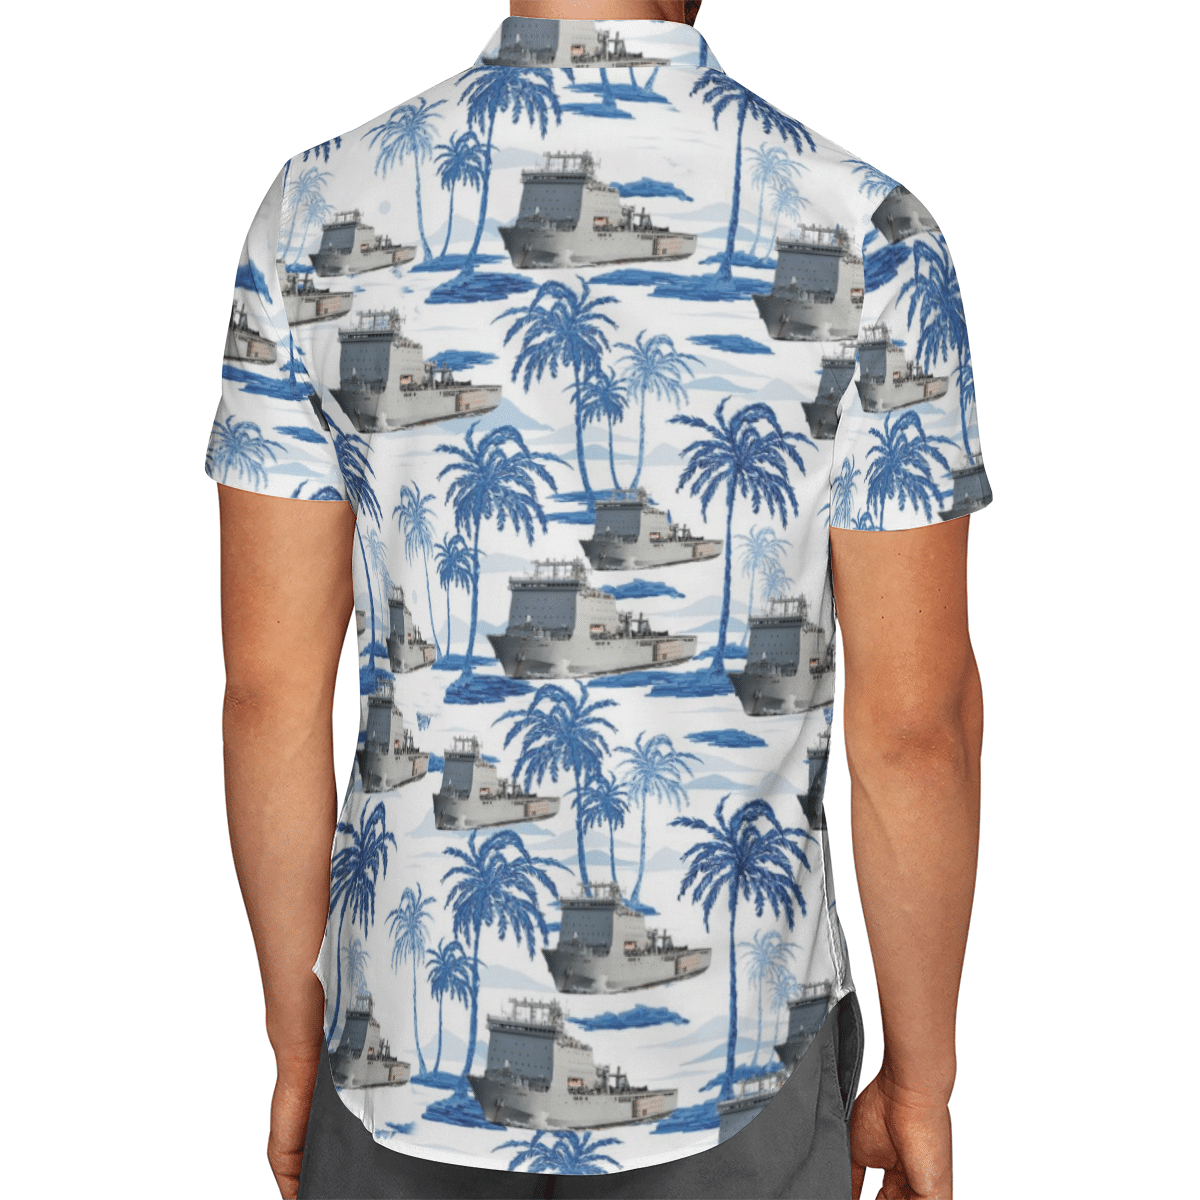 Going to the beach with a quality shirt 198